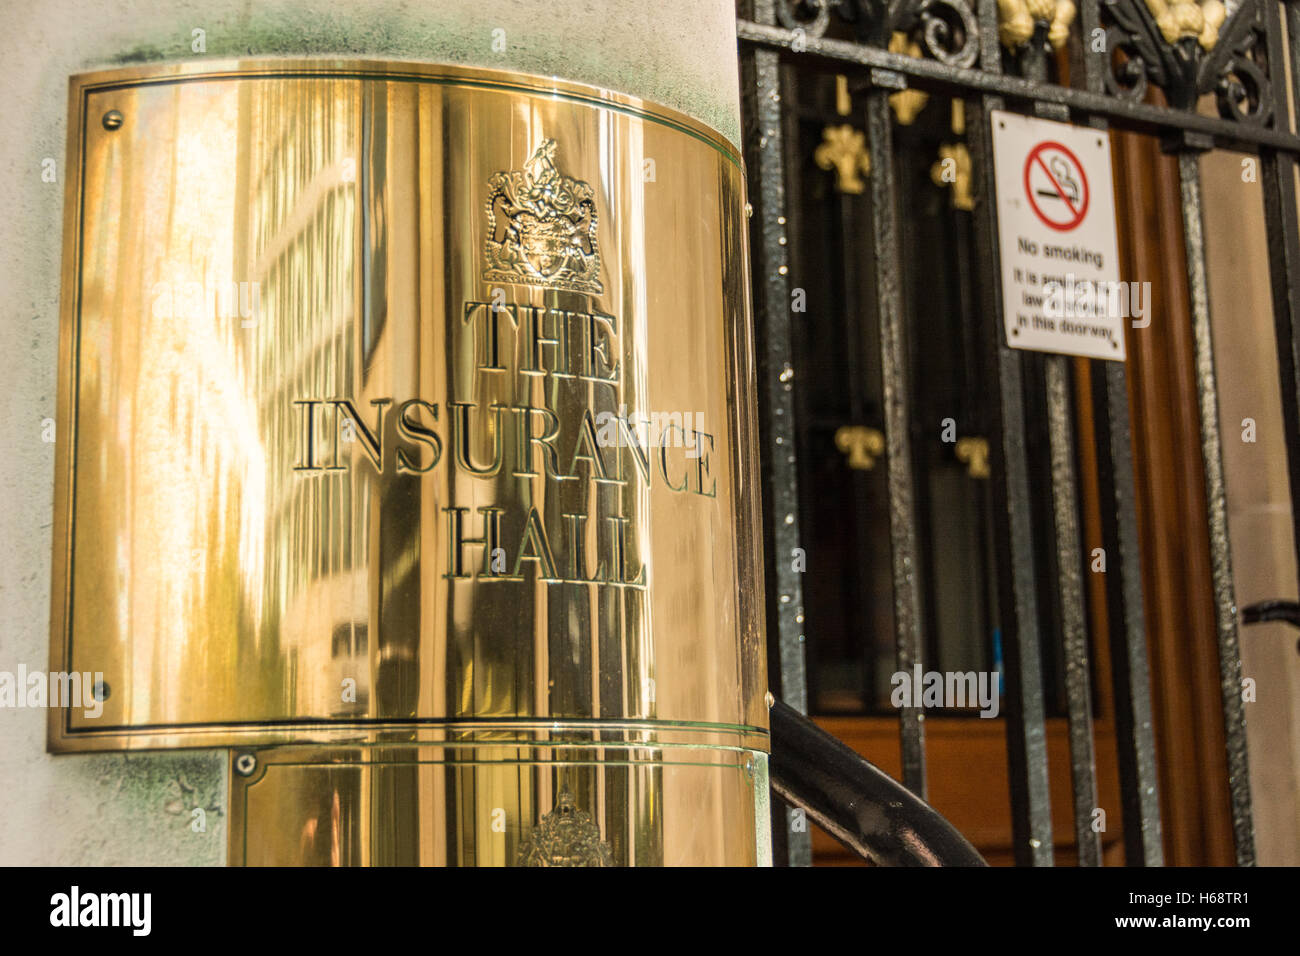 Plaque outside The Worshipful Company of Insurers in the City of London, UK Stock Photo